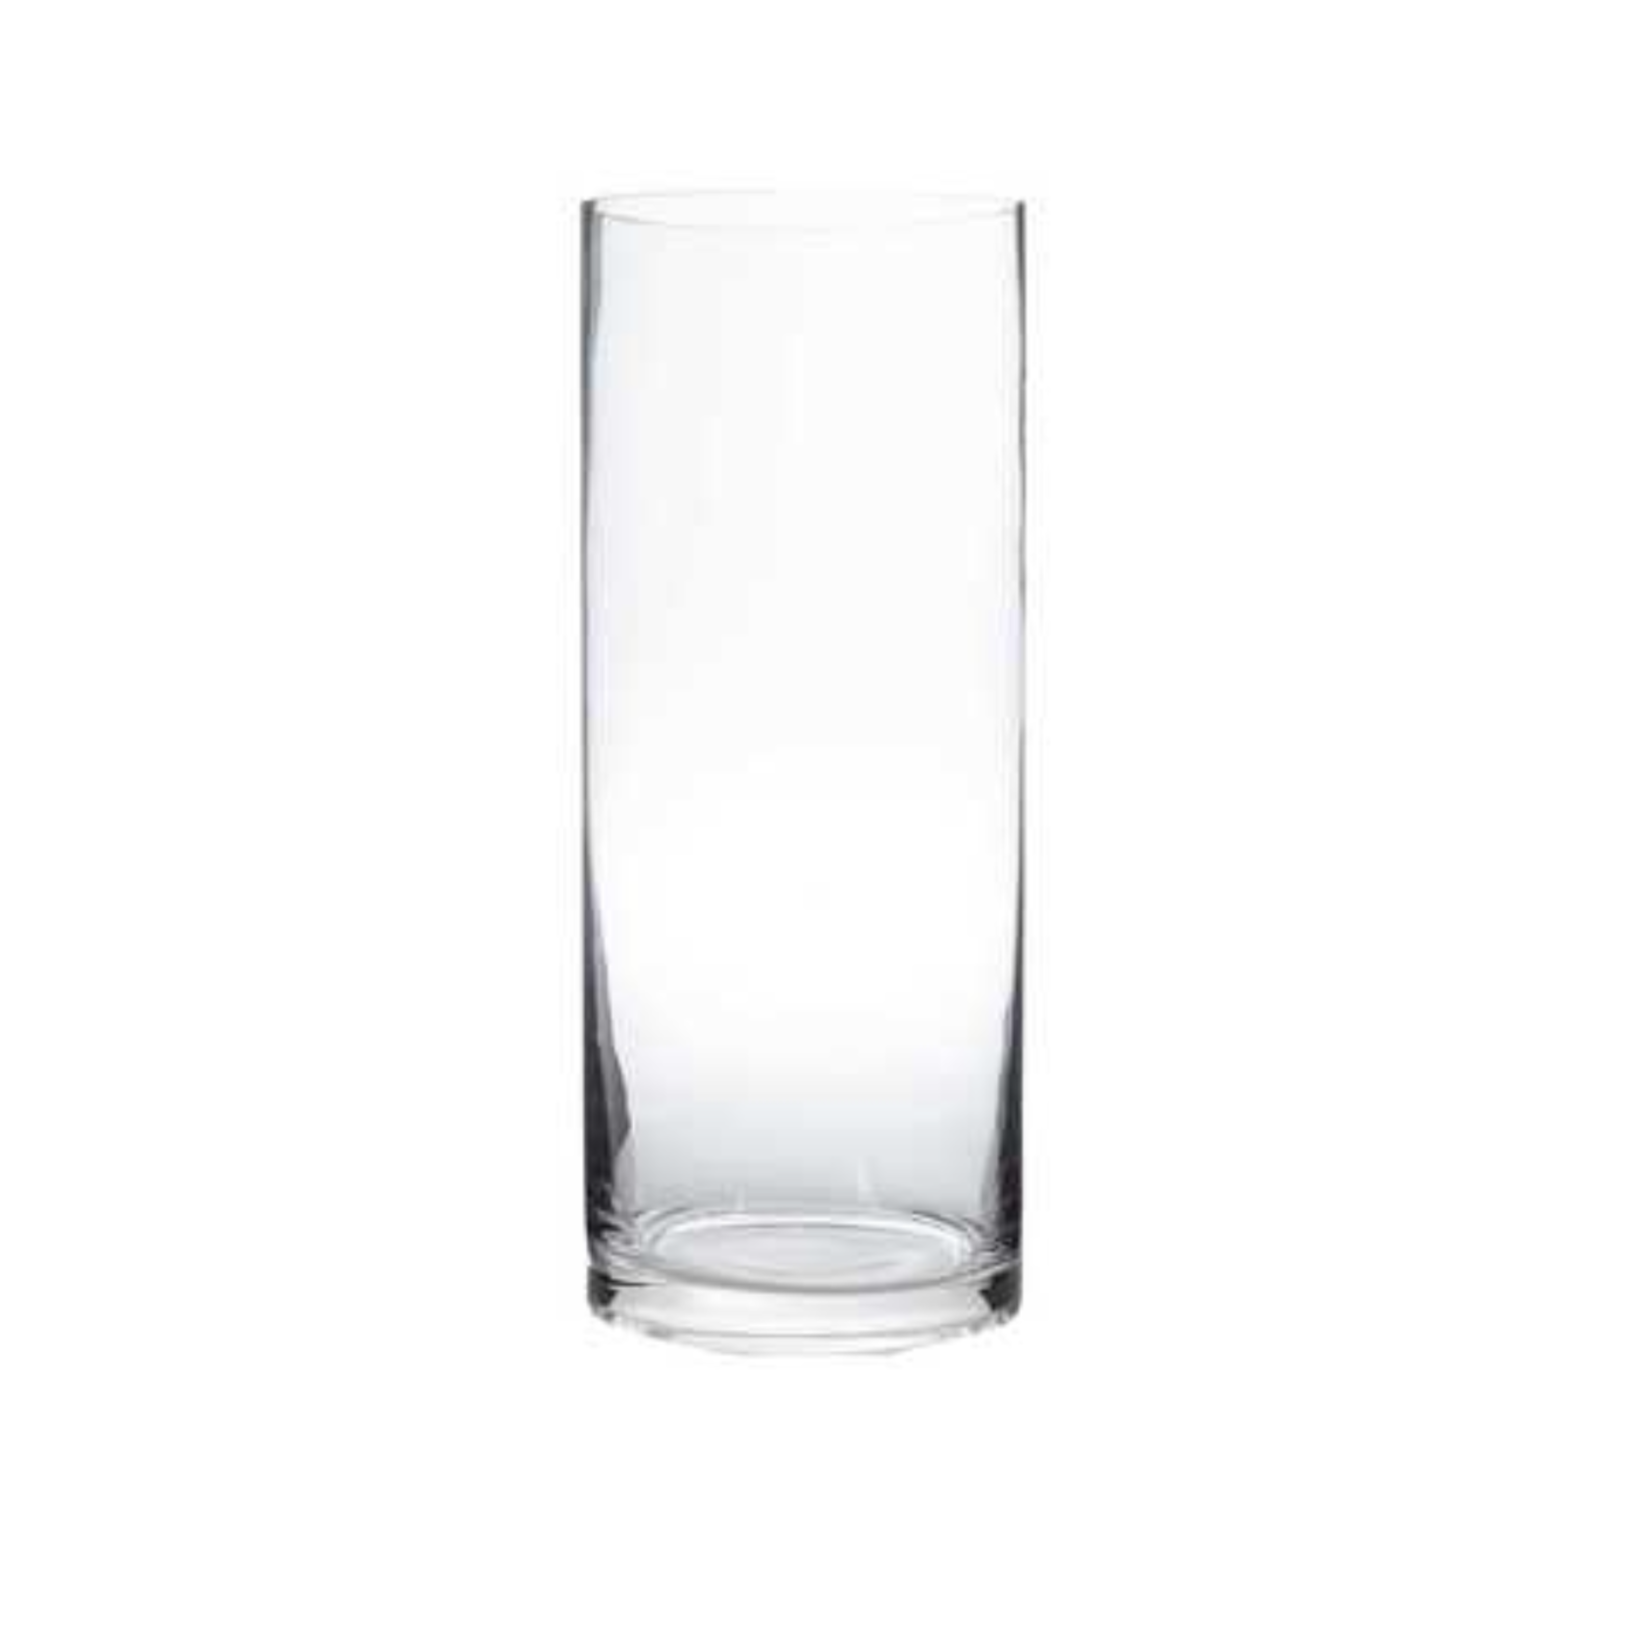 14"H X 10" CLEAR GLASS CYLINDER VASE